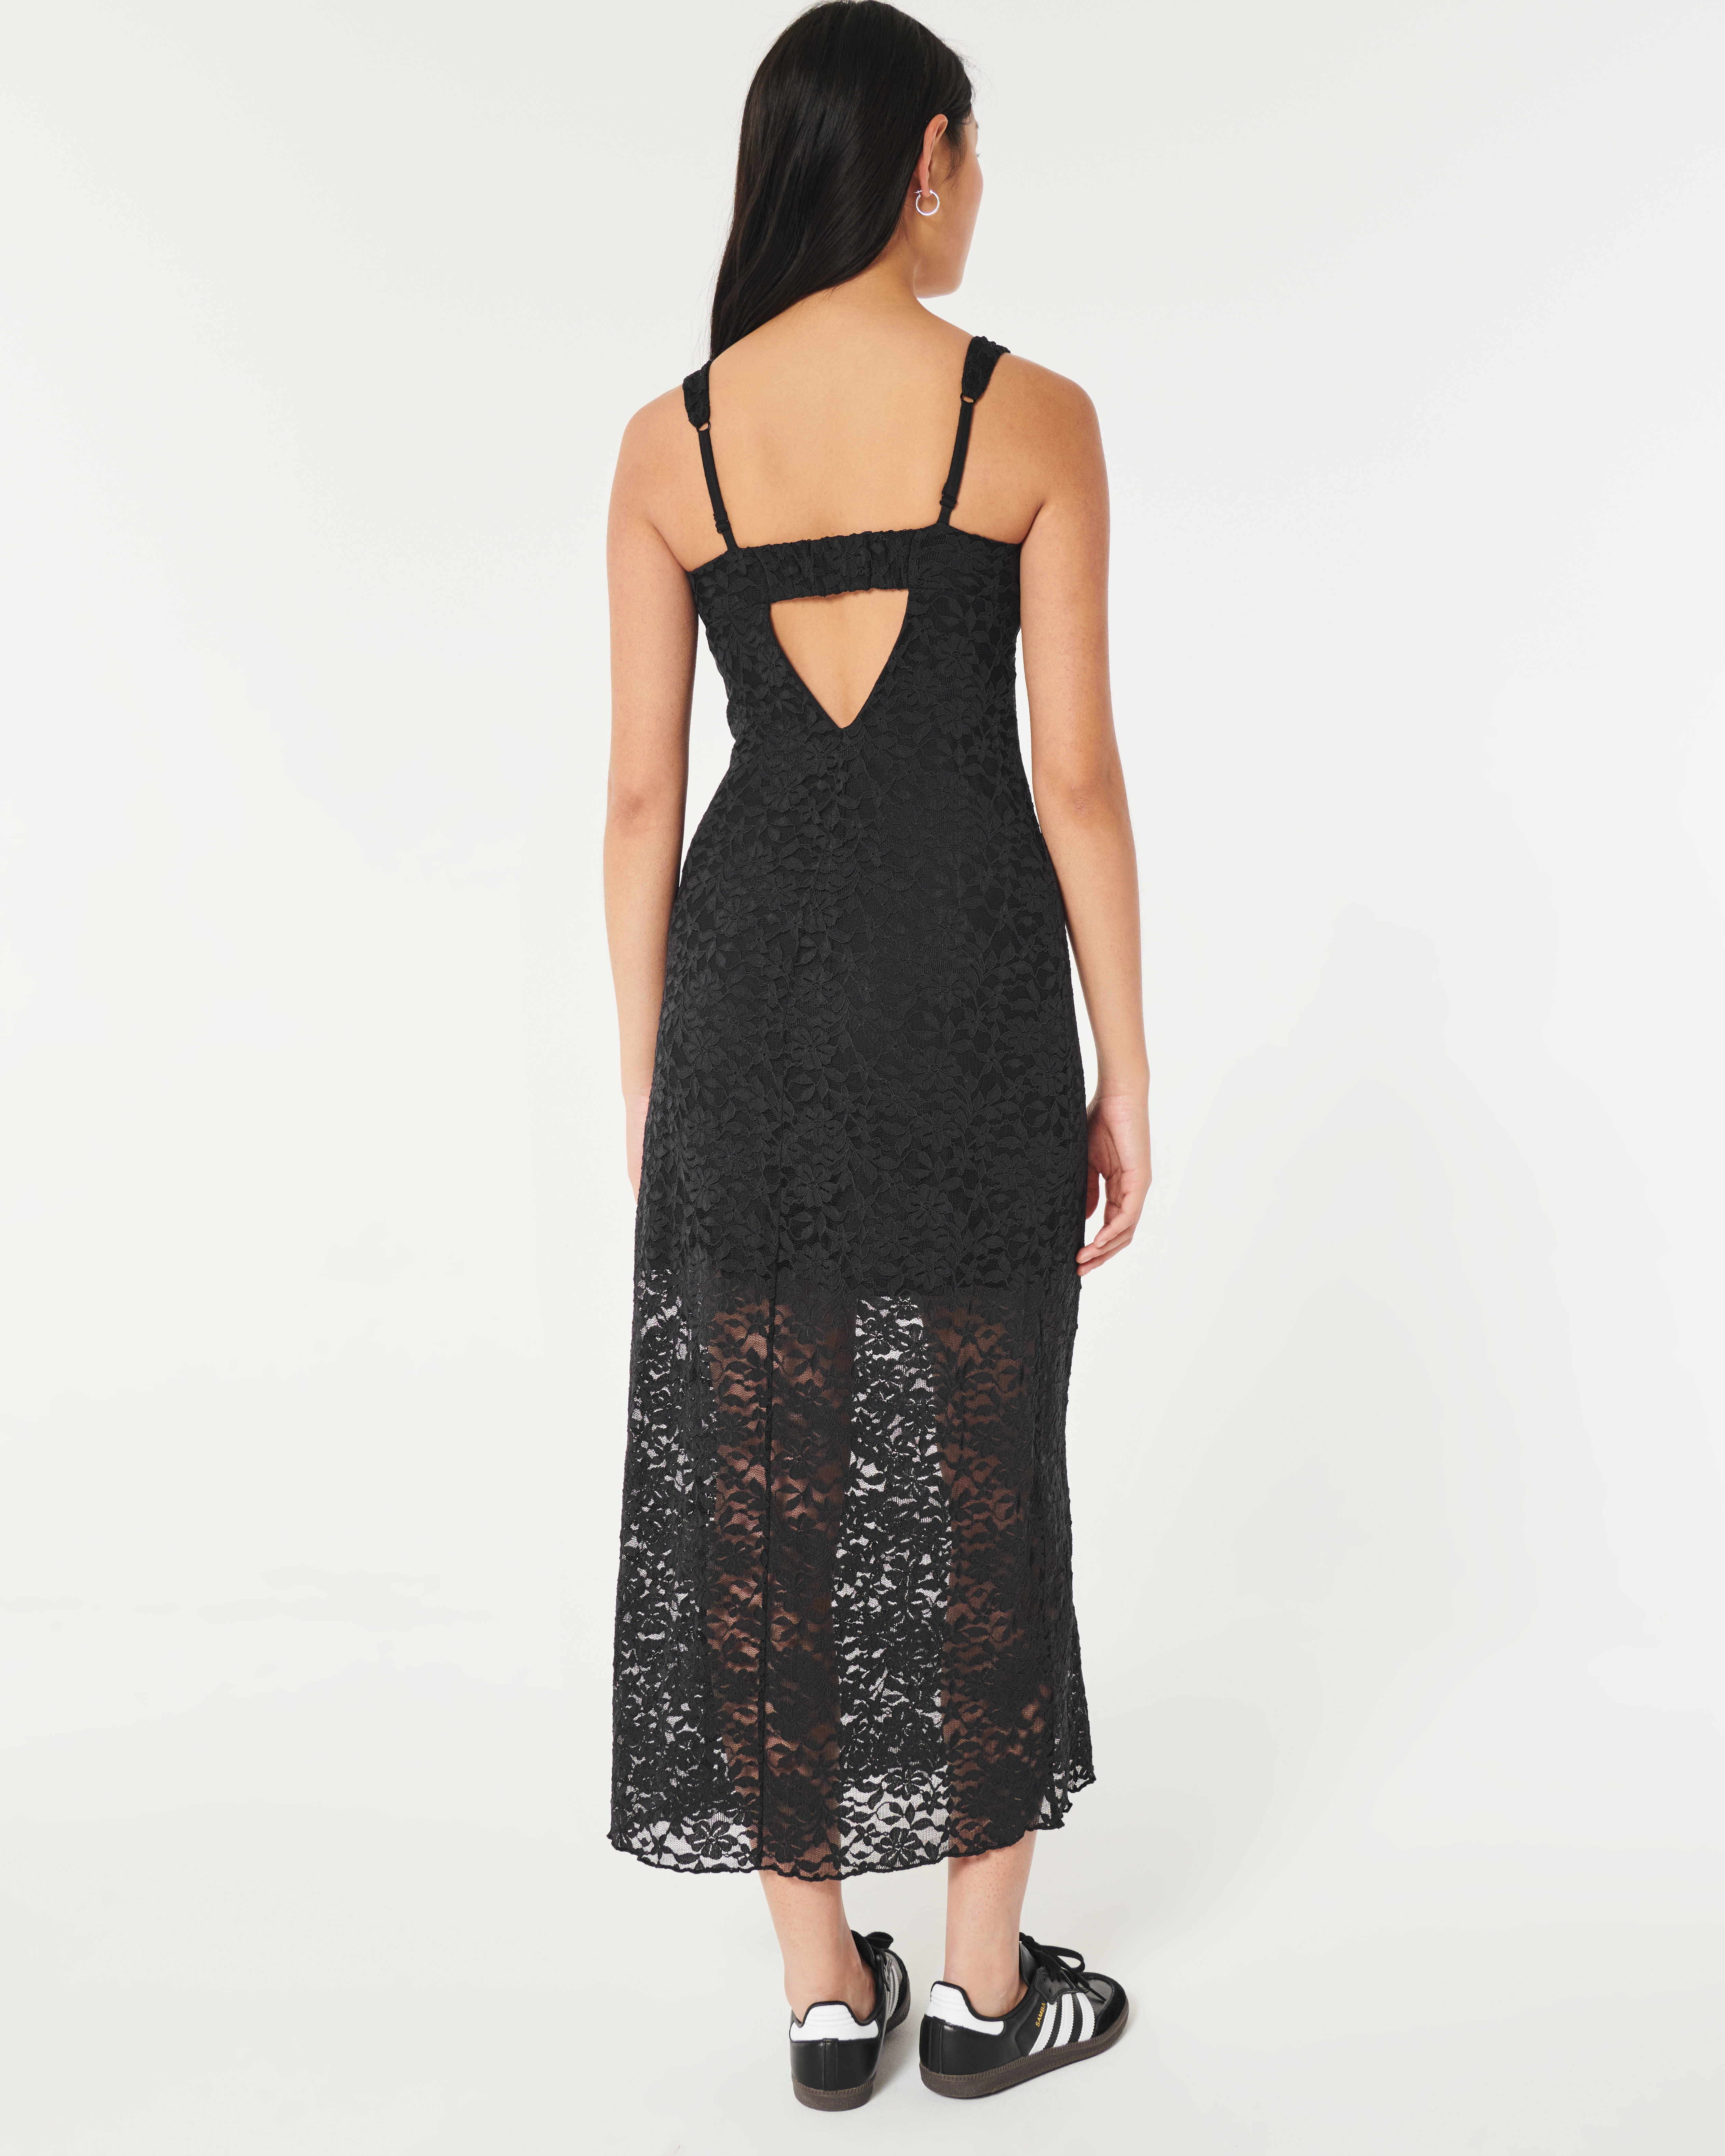 Social Tourist All-Over Lace Dress